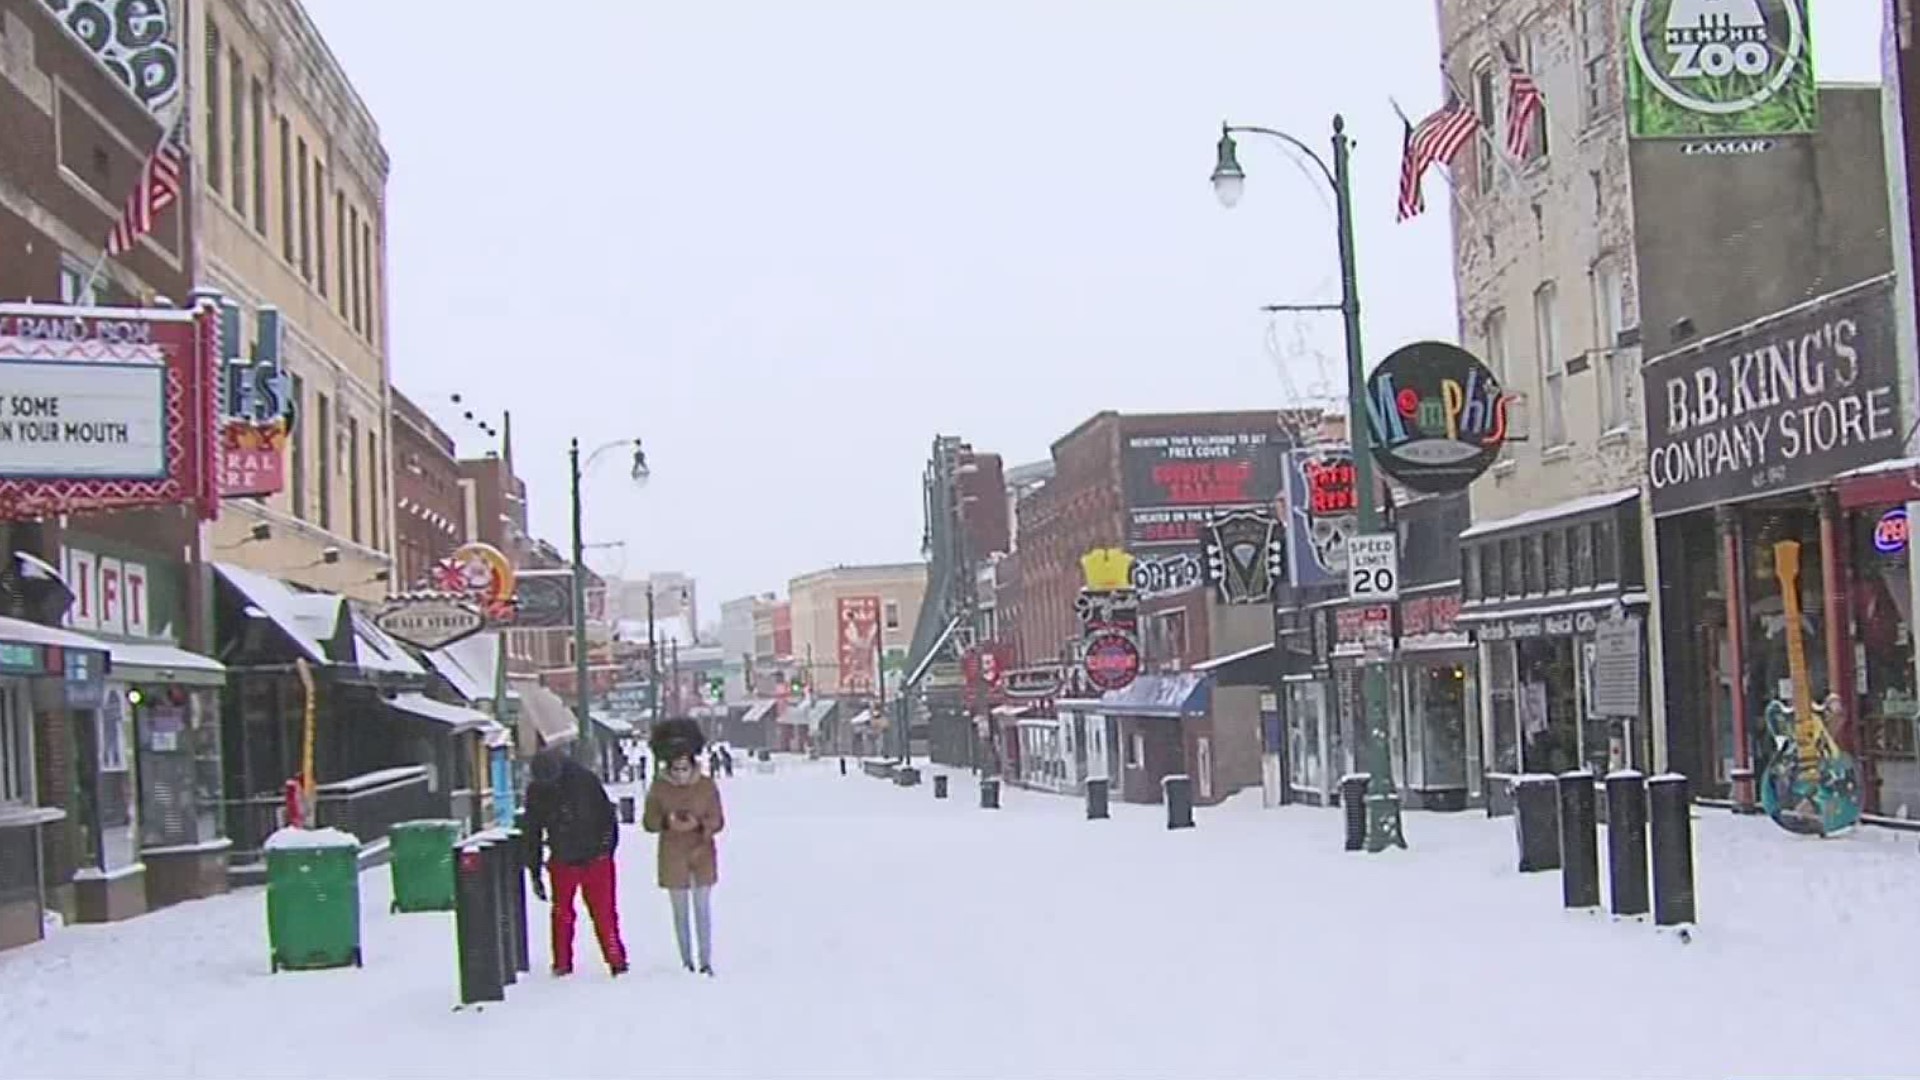 People in Downtown Memphis enjoyed the snow on Monday